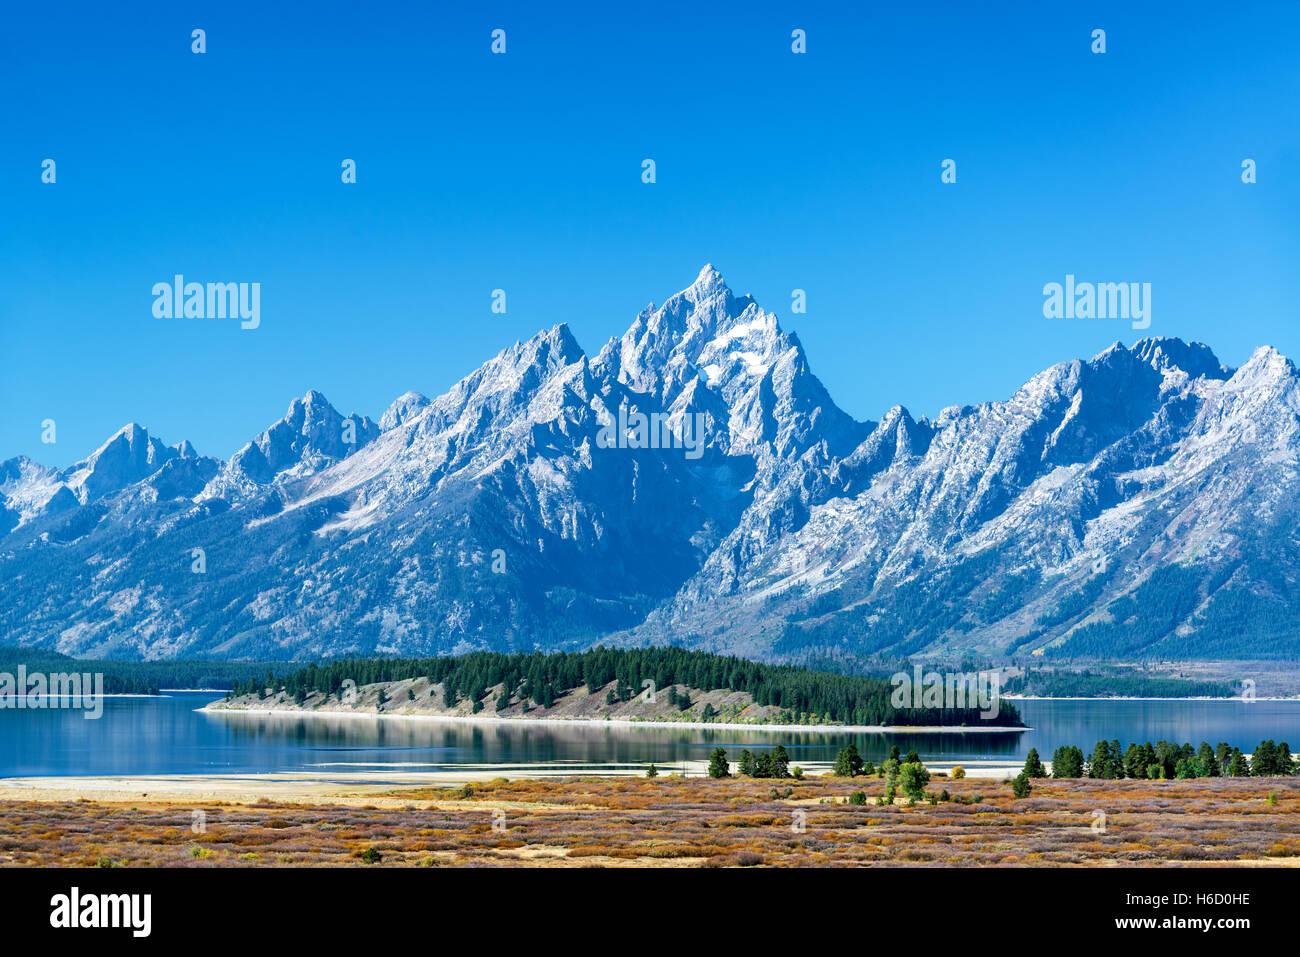 Teton Range with a tree covered island in the middle of Jackson Lake in Grand Teton National Park Stock Photo